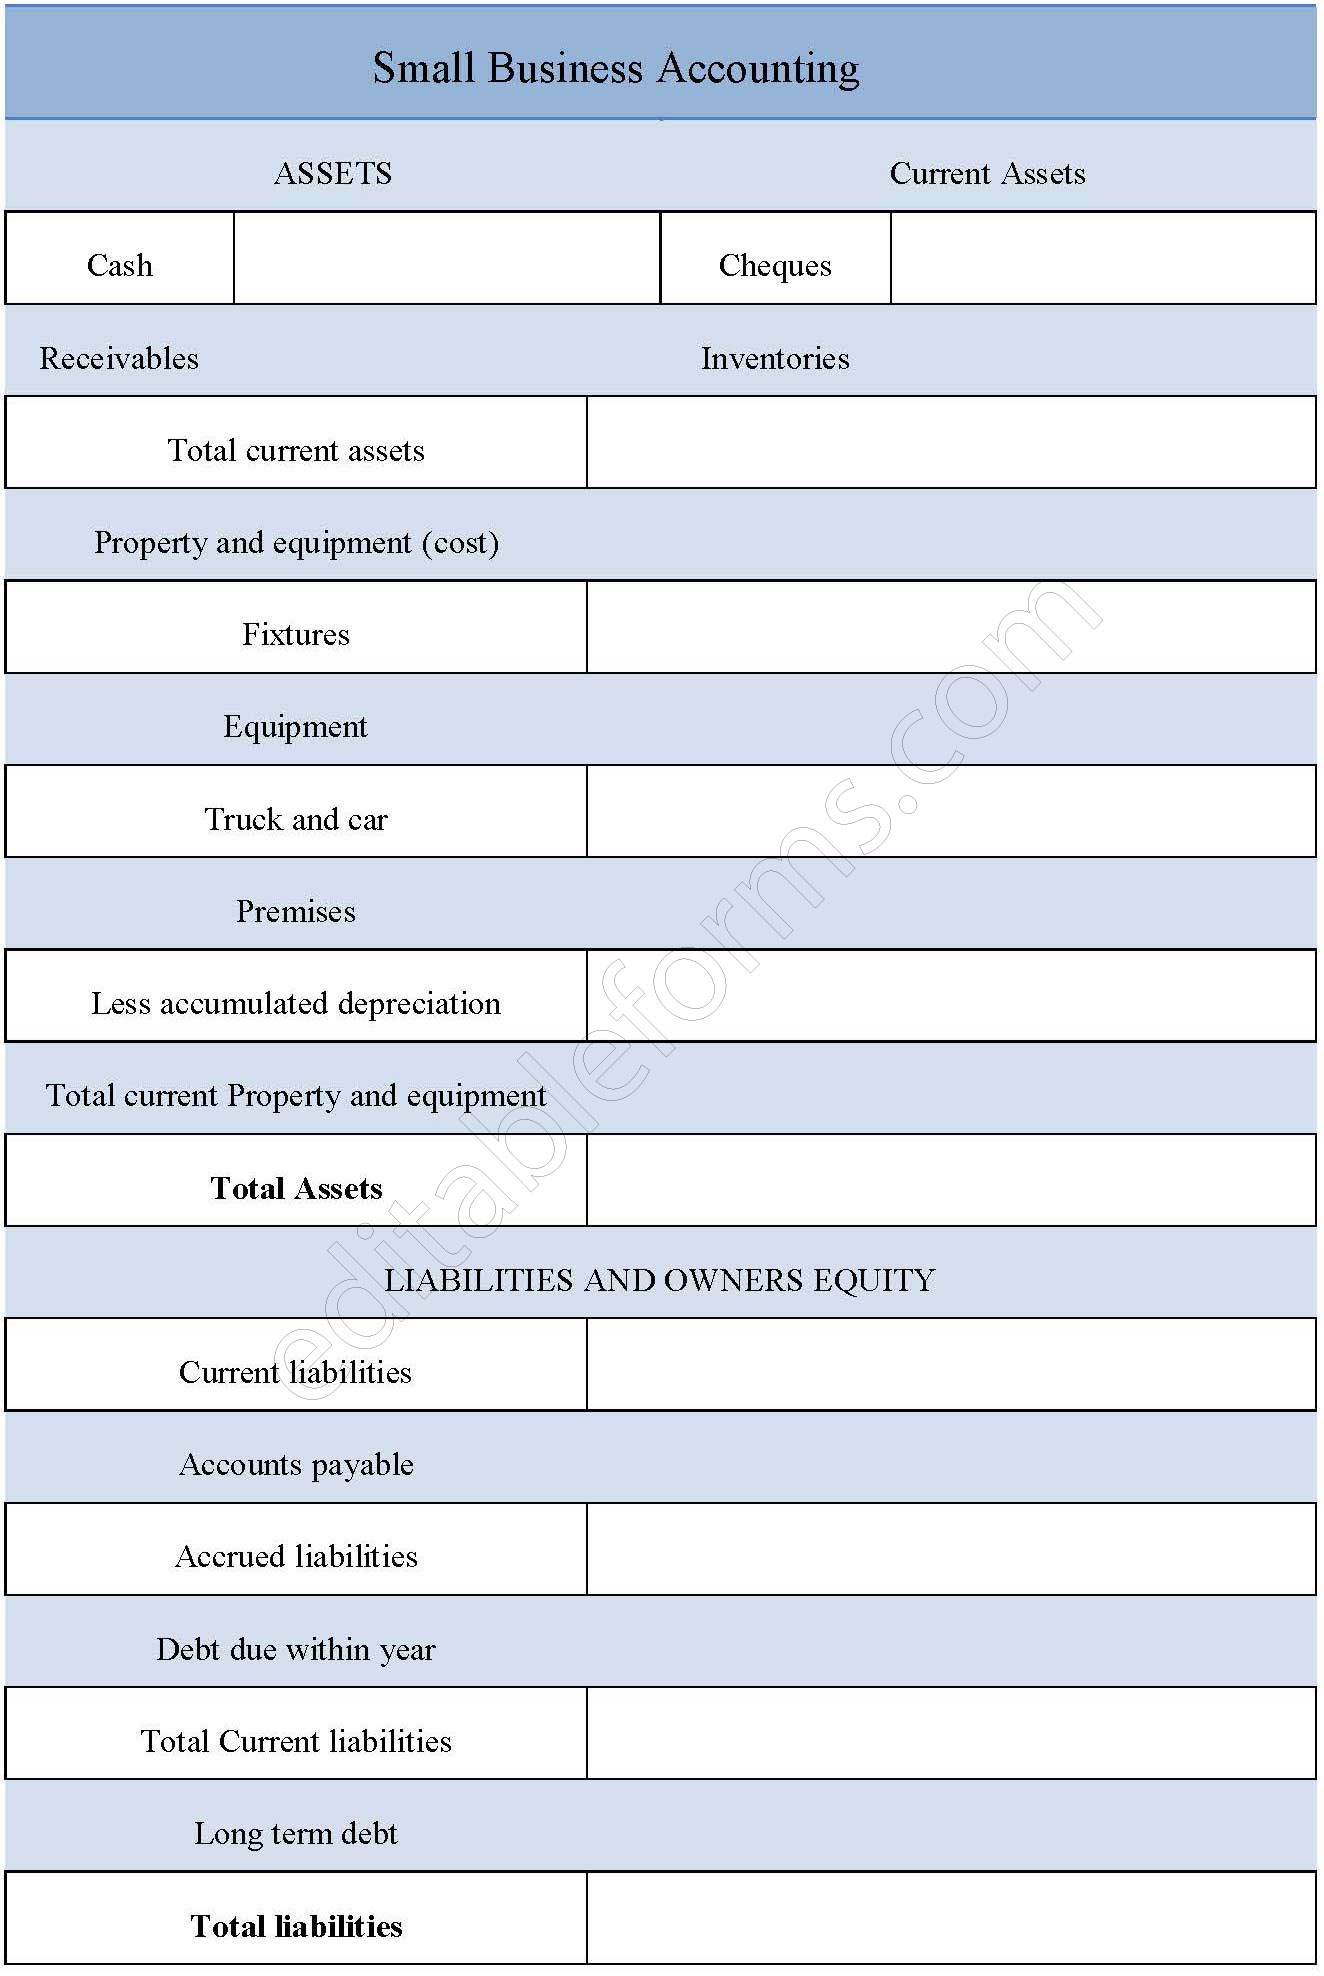 Small Business Accounting Form